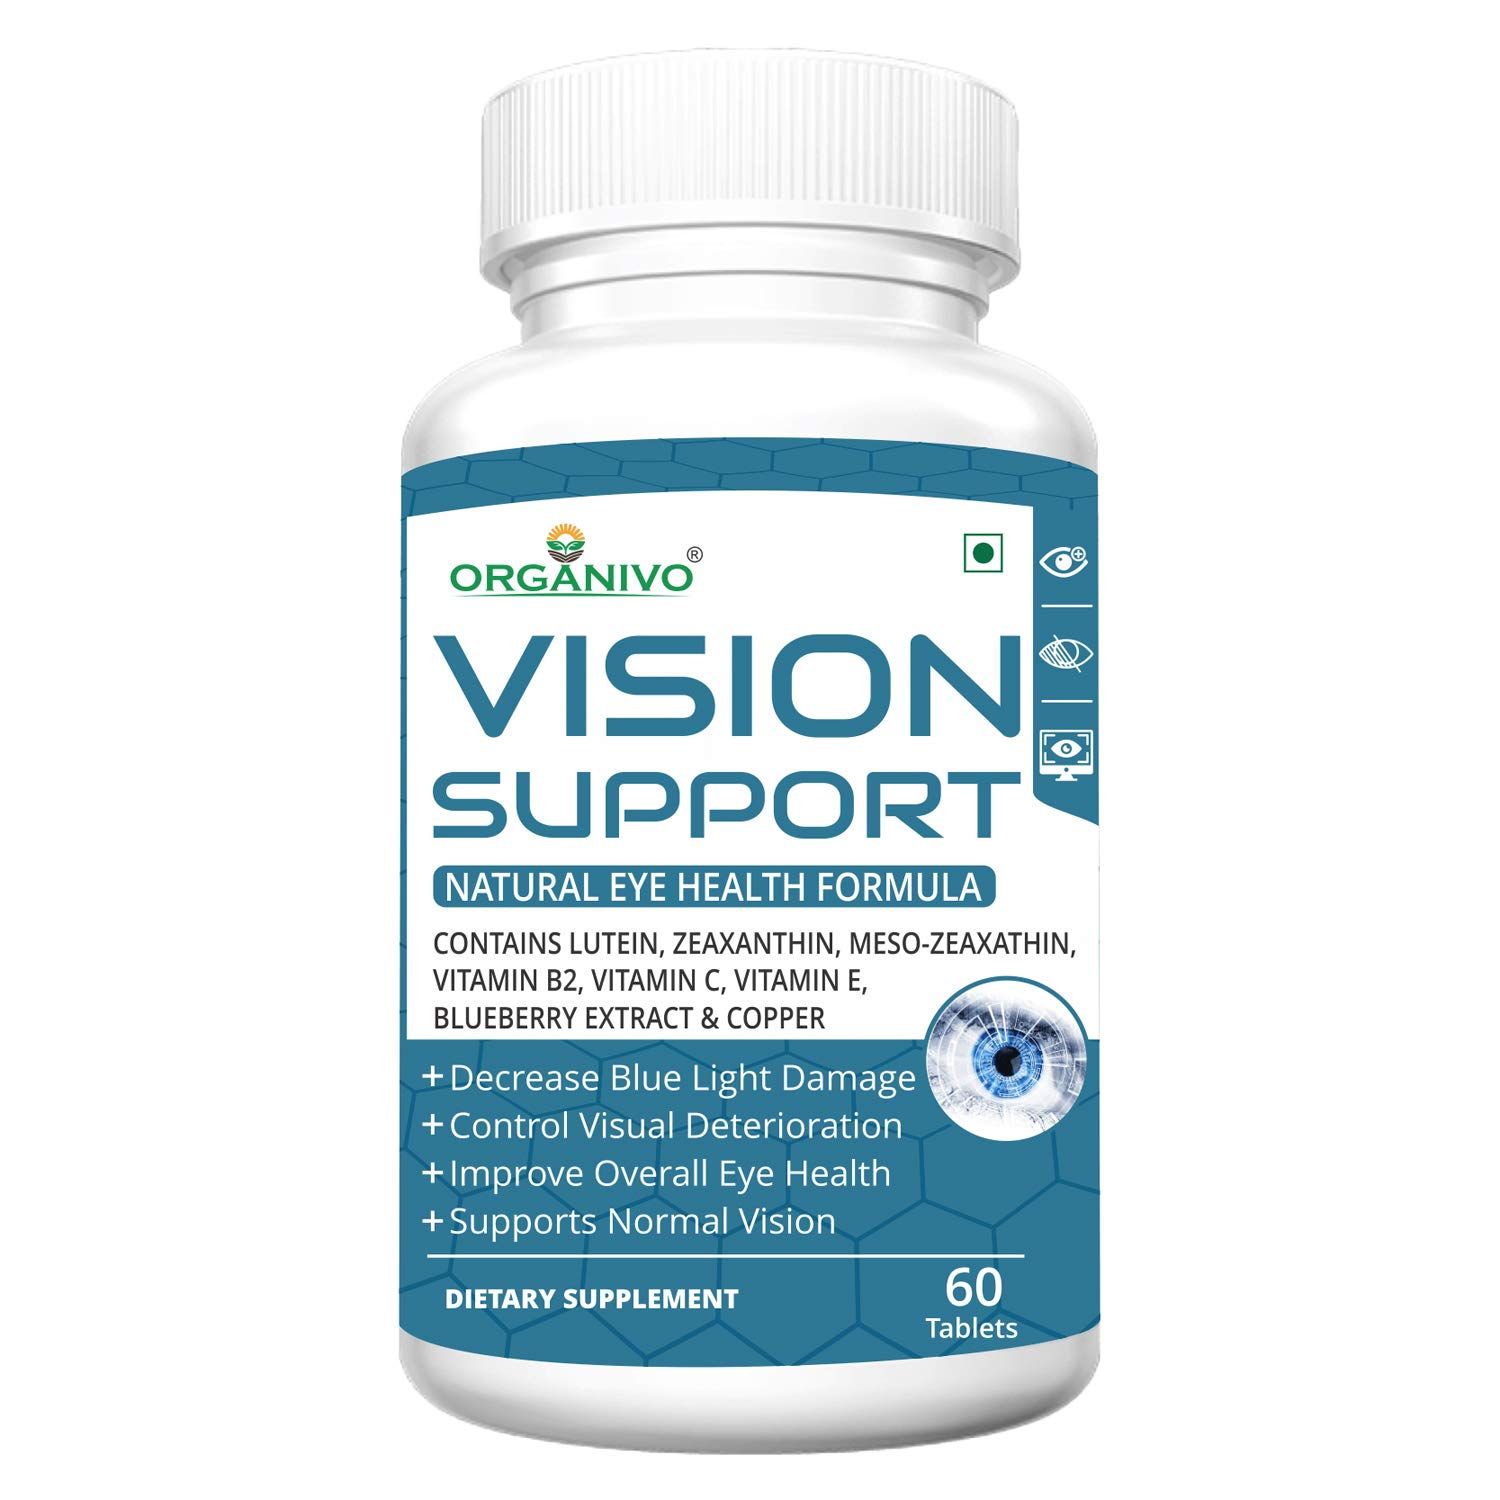 Organivo Vision Support Complete Eye Care Supplement Image